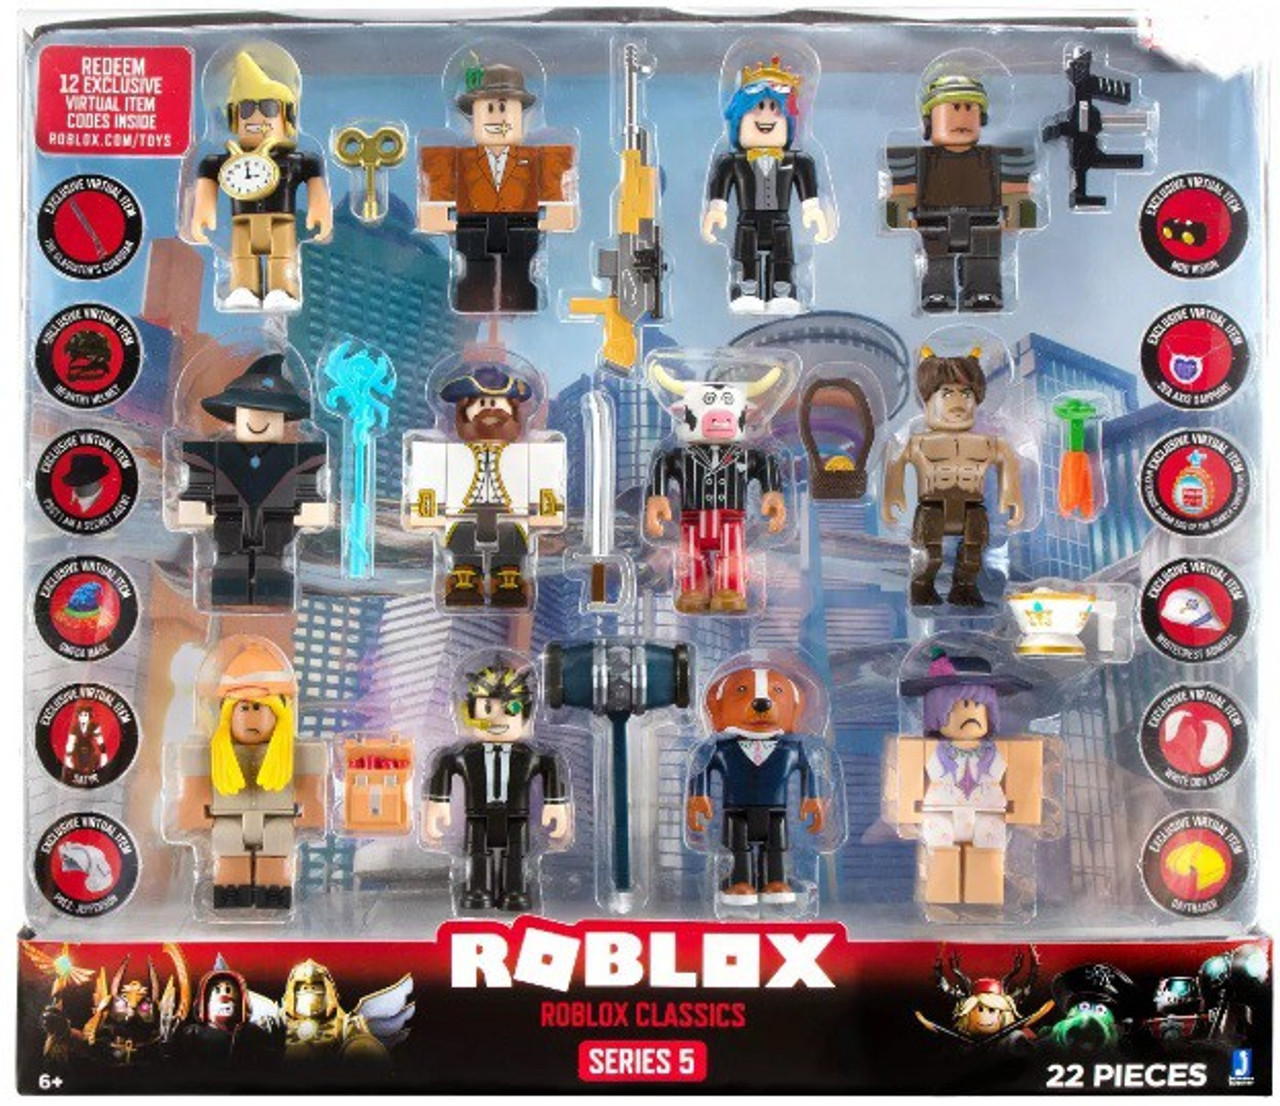 Roblox Series 5 Roblox Classics Exclusive 3 Action Figure 12 Pack Jazwares Toywiz - series 5 roblox toy codes